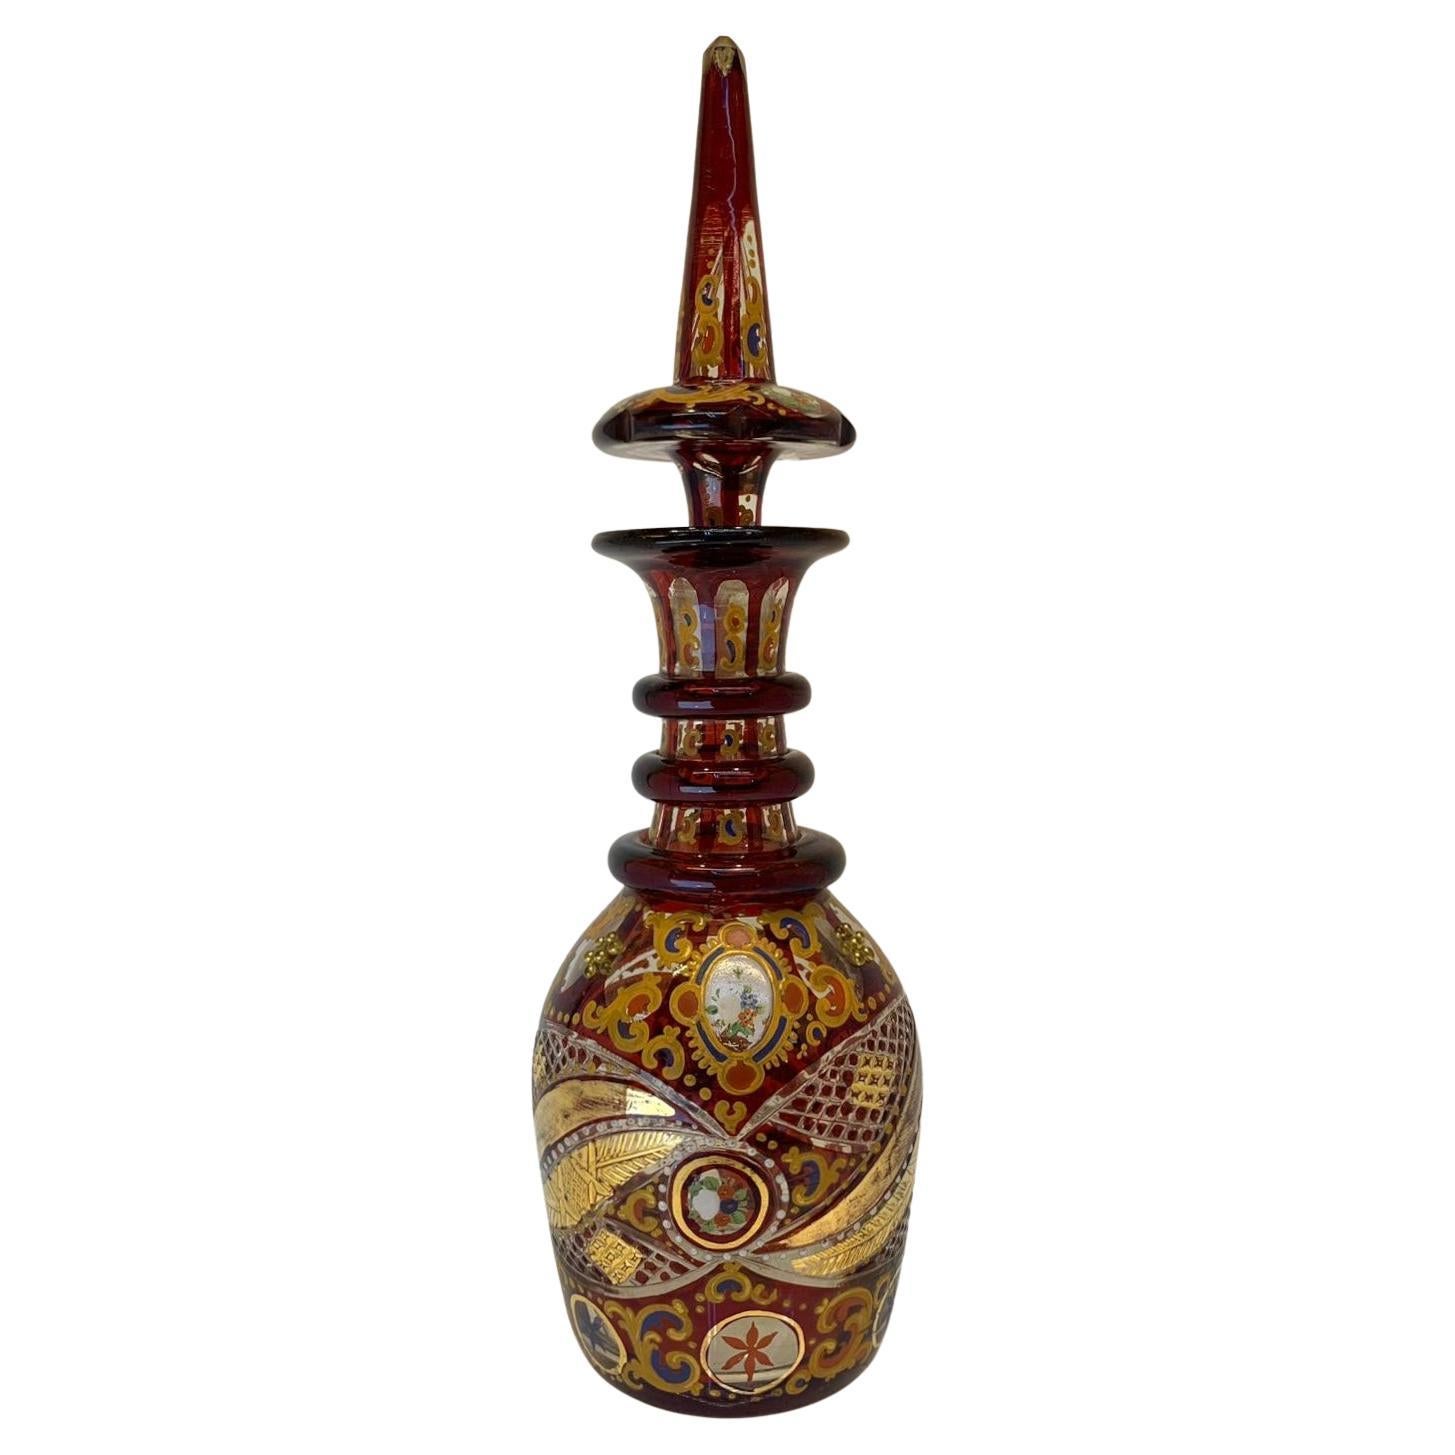 Enameled Antique Ruby Enamelled Glass Decanter, Bohemian for Islamic Market, 19th Century For Sale